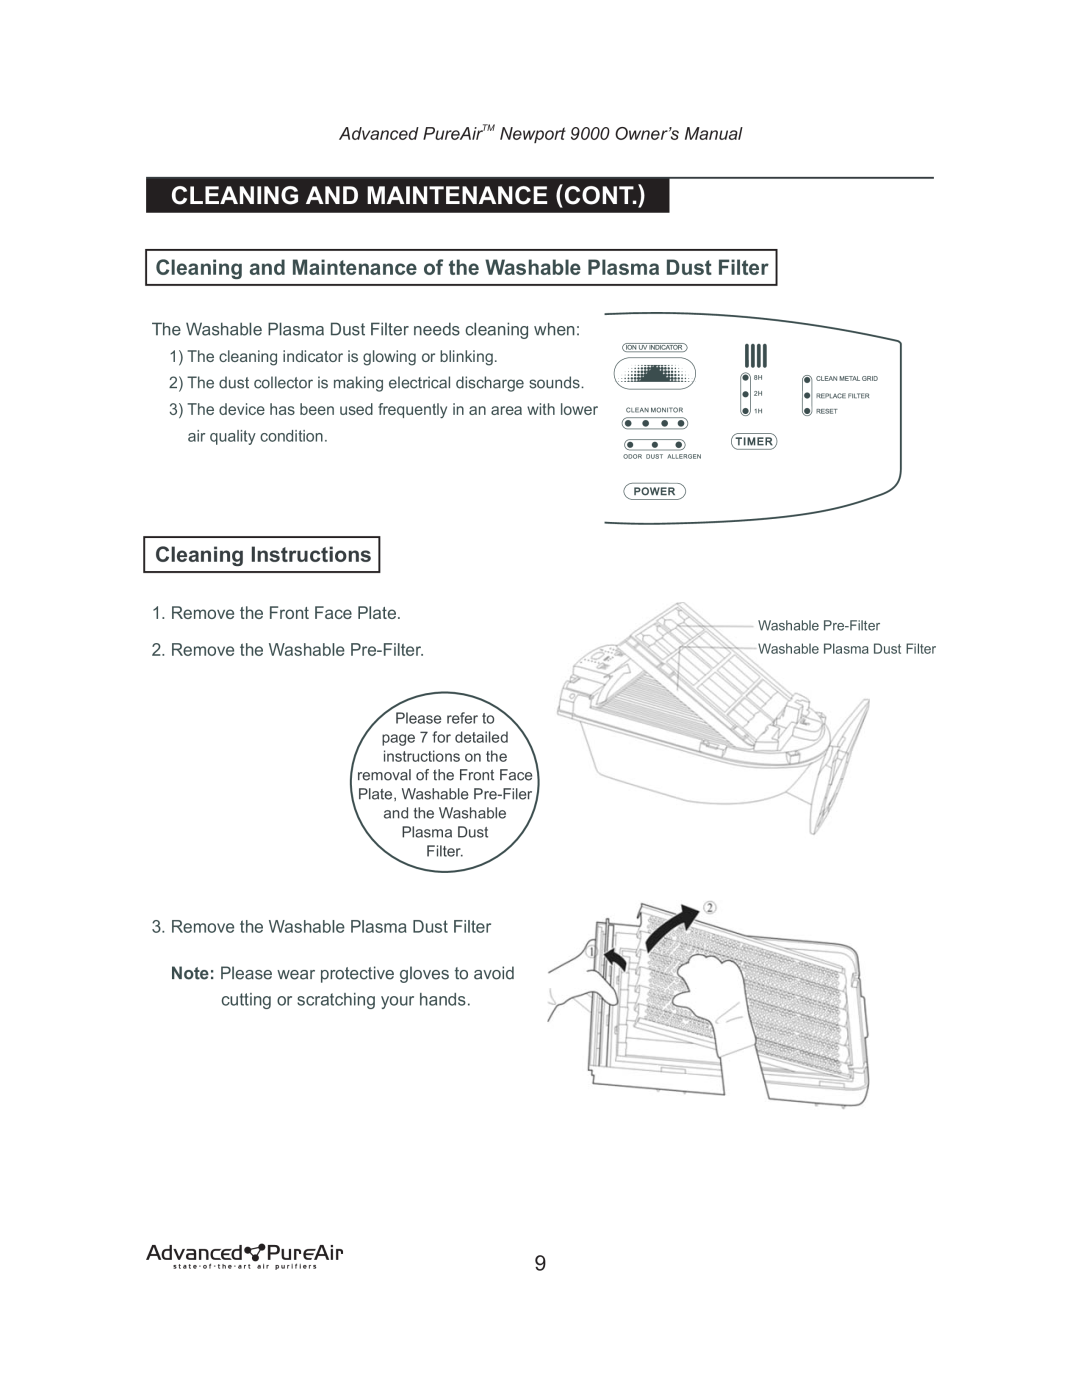 Nlynx NEWPORT 9000 owner manual Cleaning Instructions, Cleaning And Maintenance Cont 